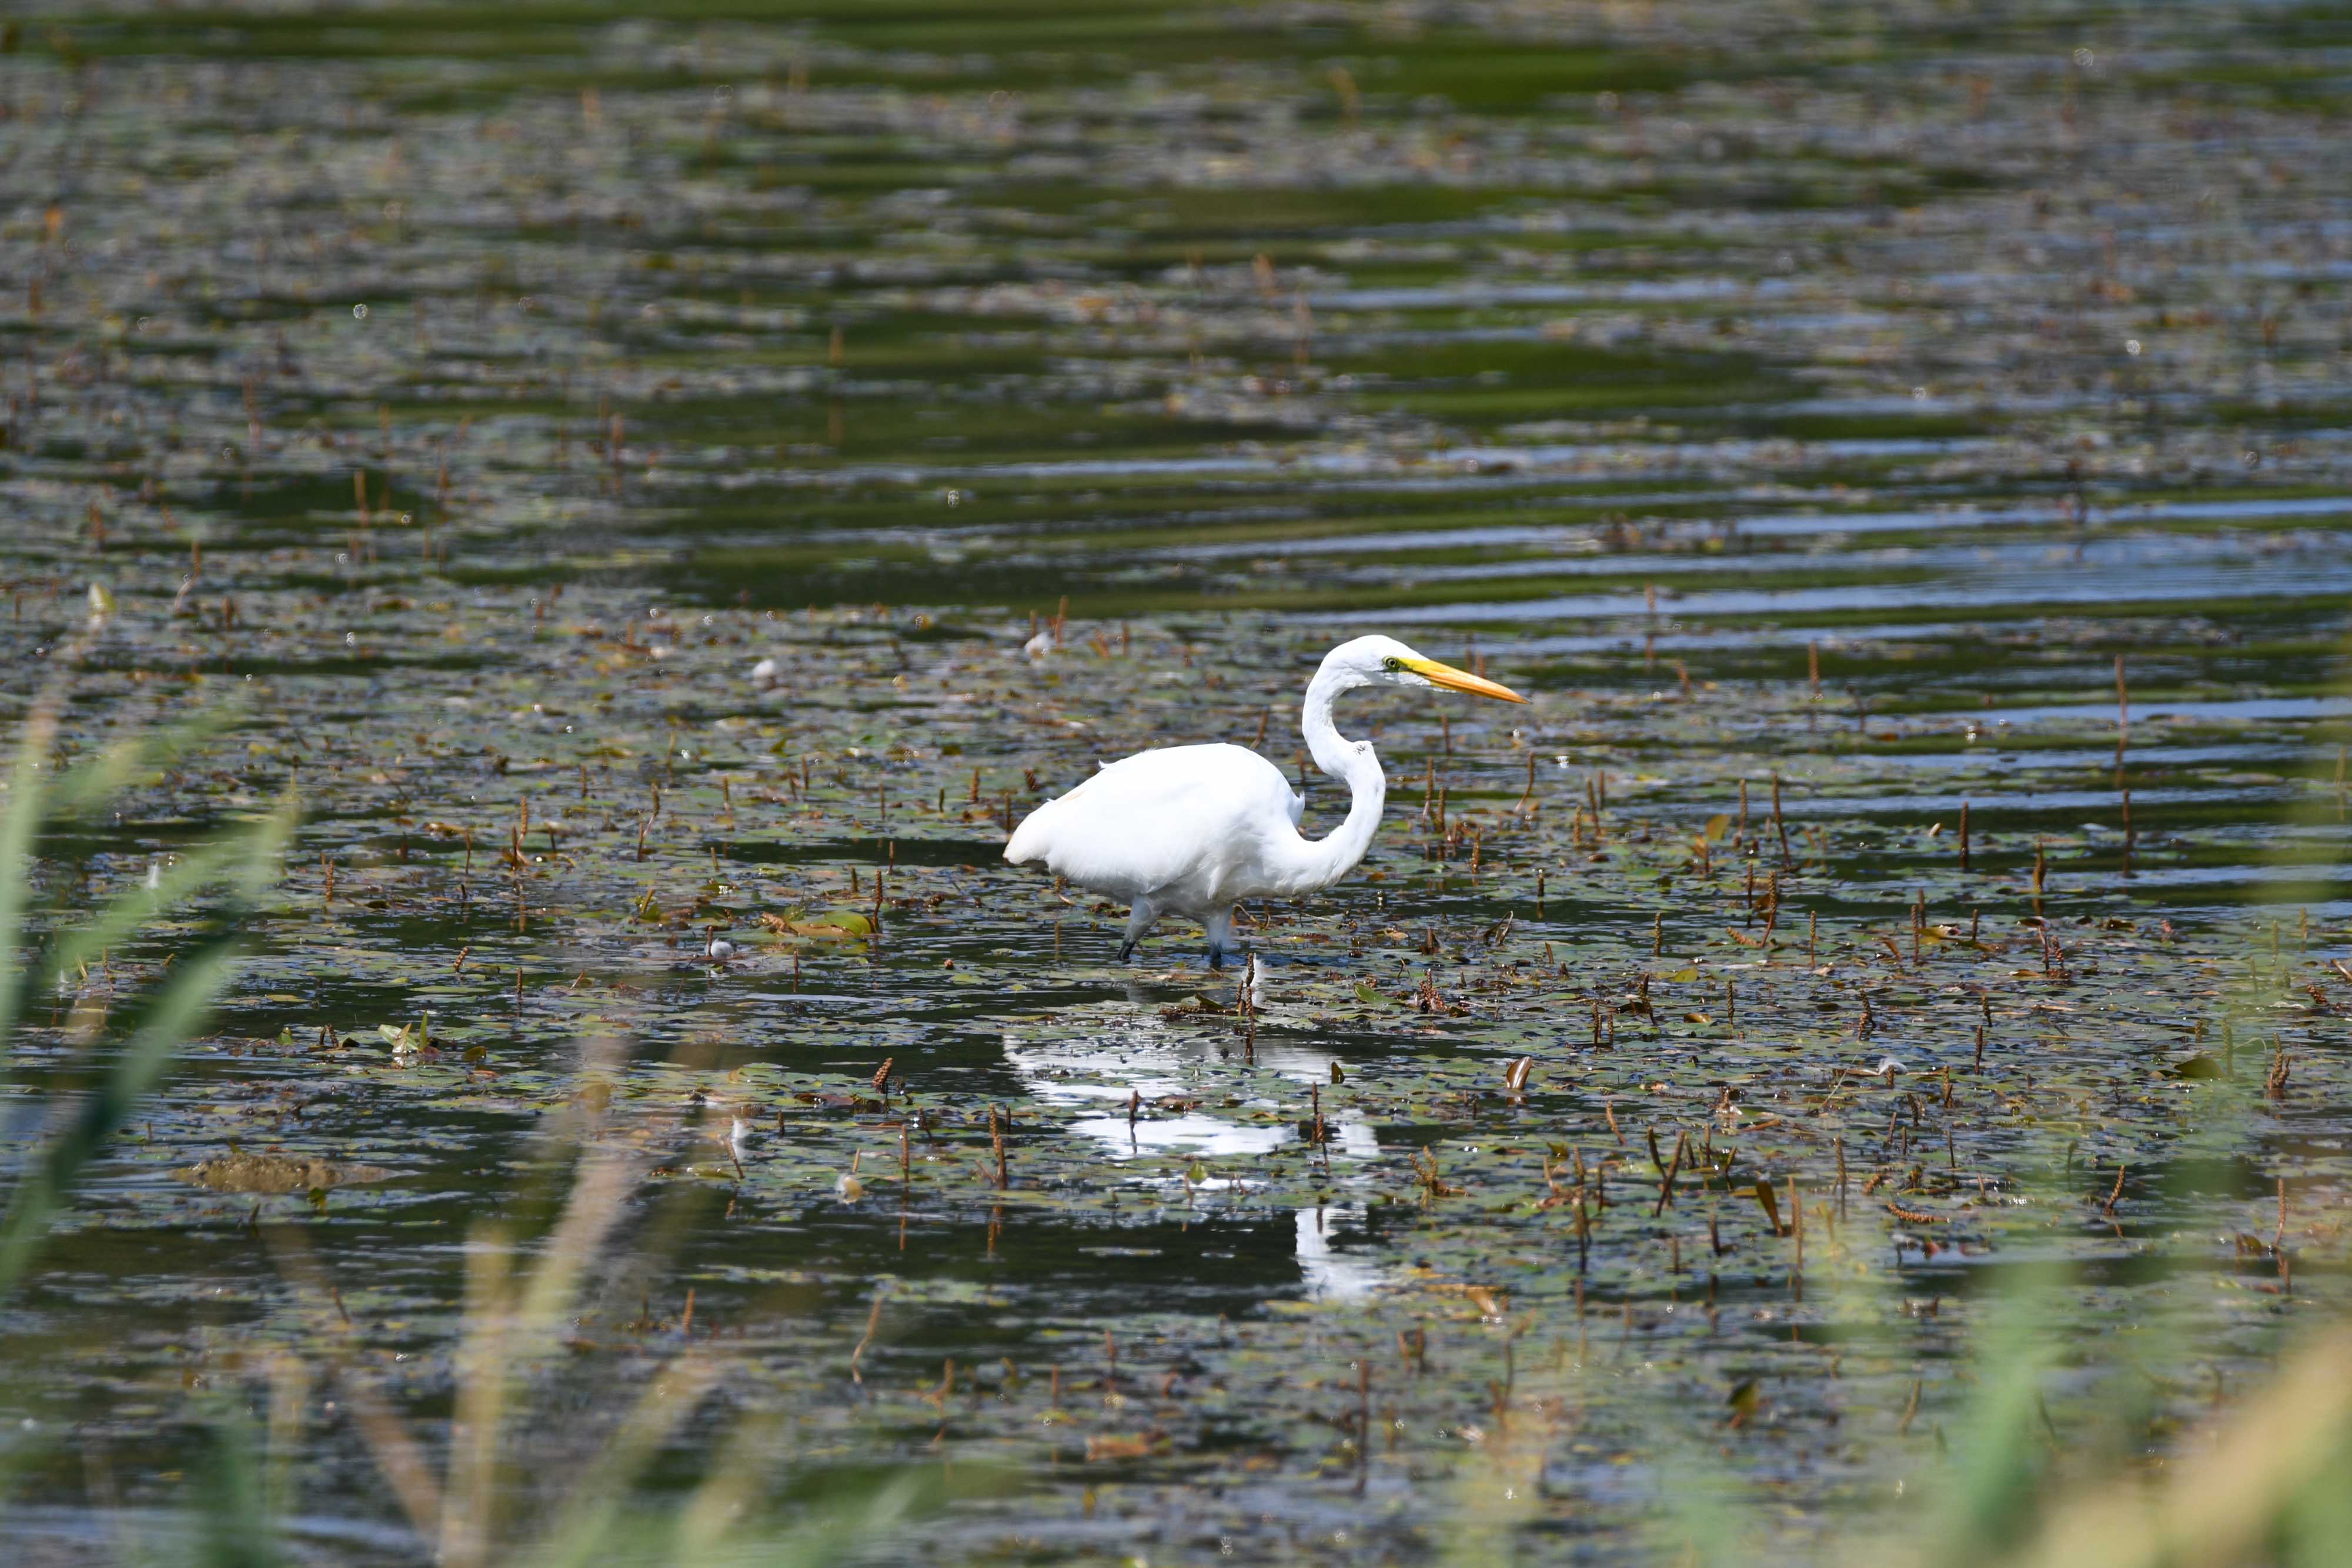 A great egret in a wetland.